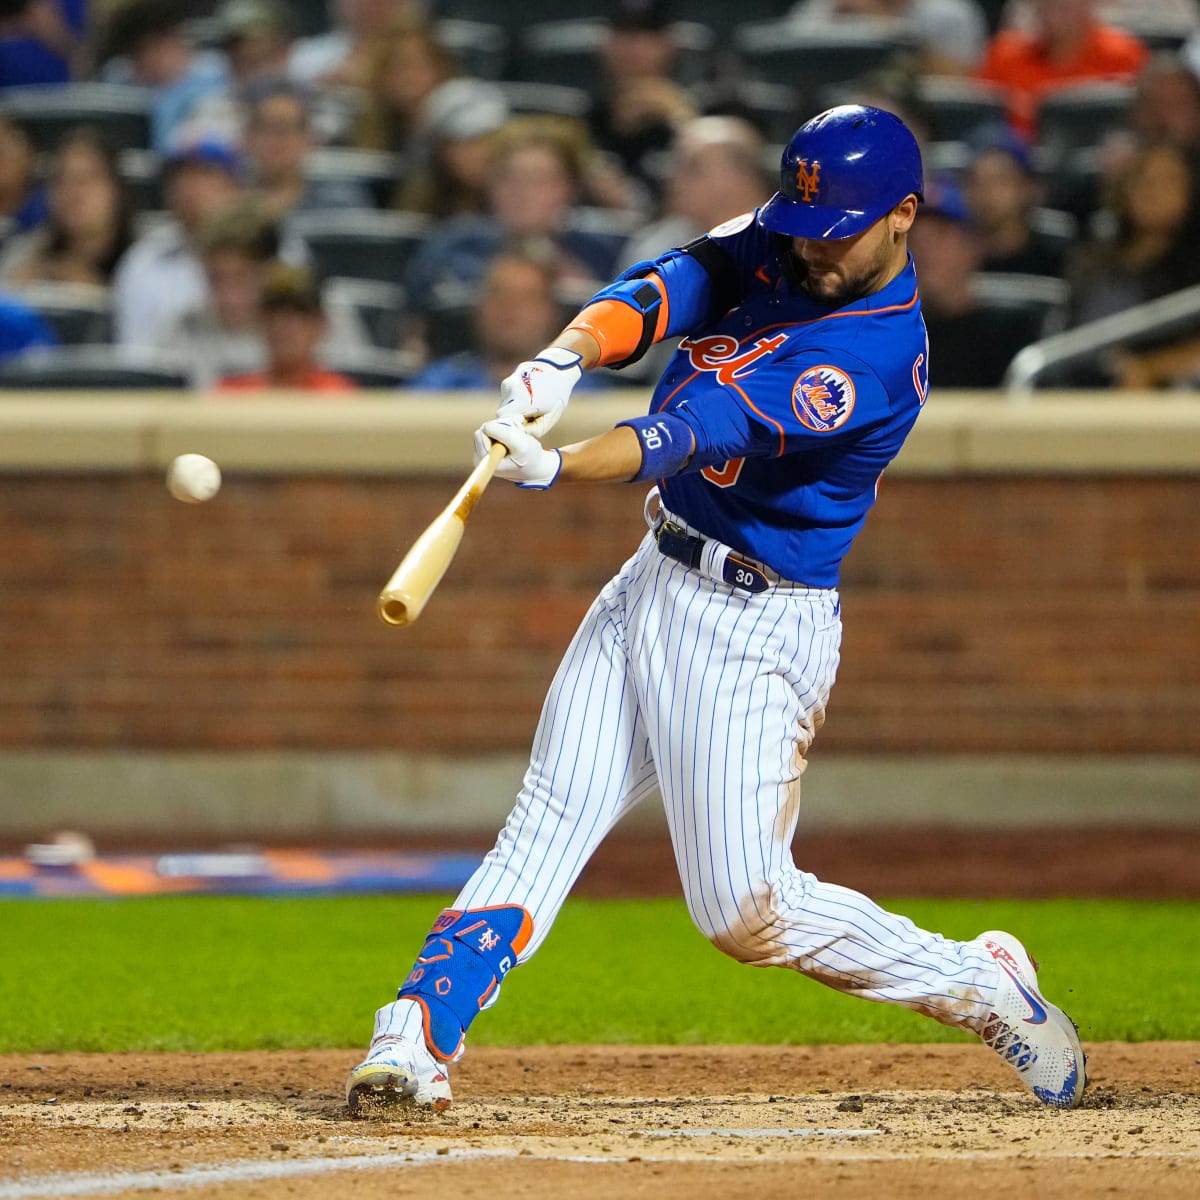 Mets-Marlins ends in controversy after Michael Conforto's walk-off